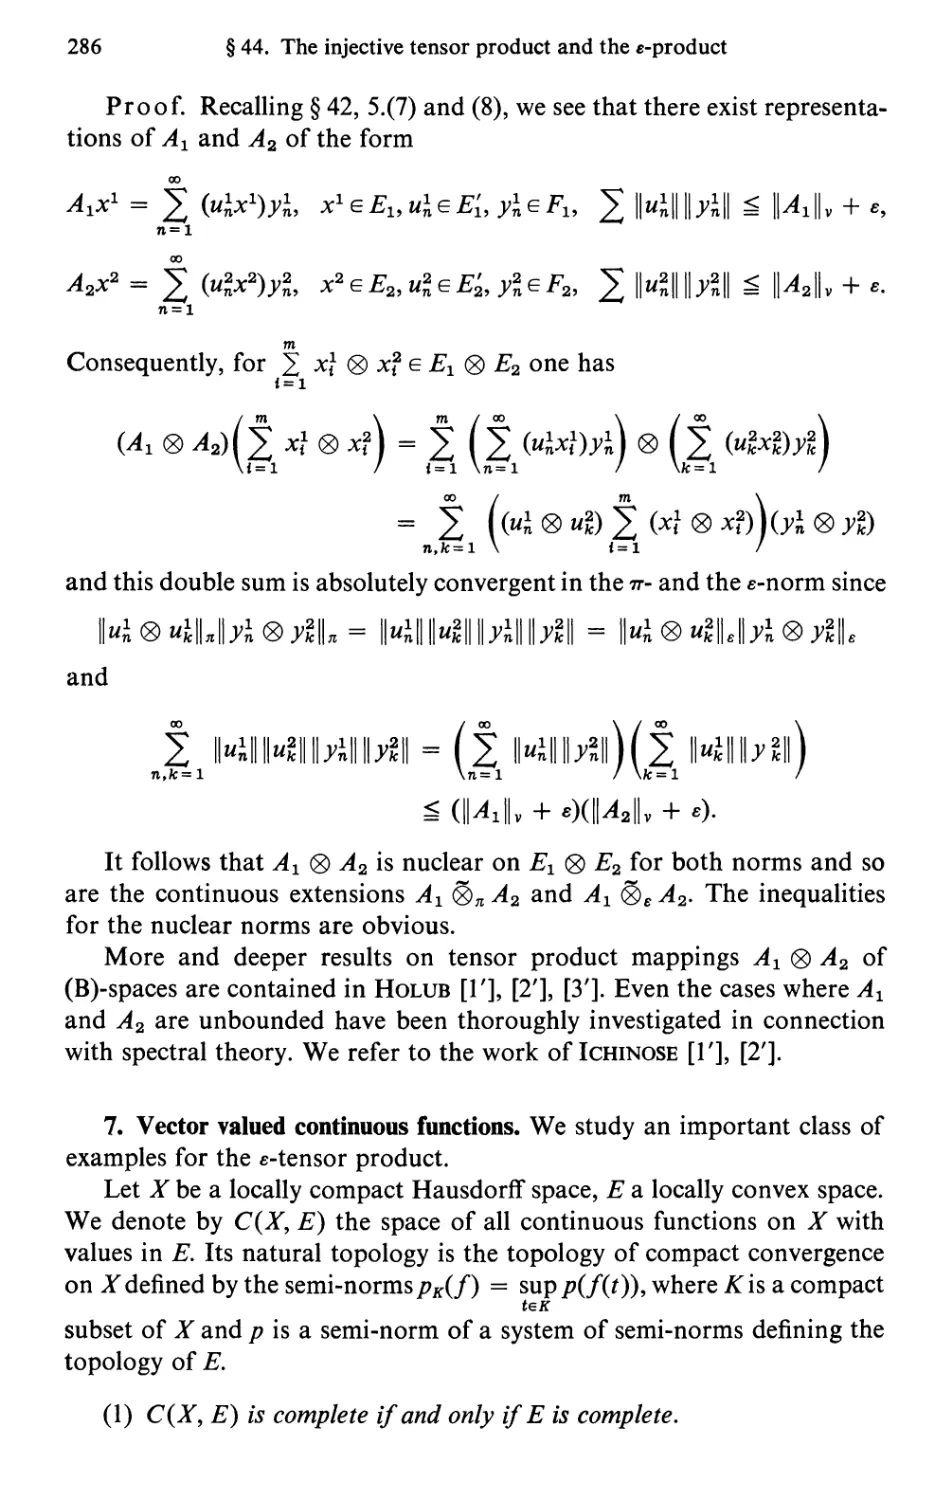 7. Vector valued continuous functions